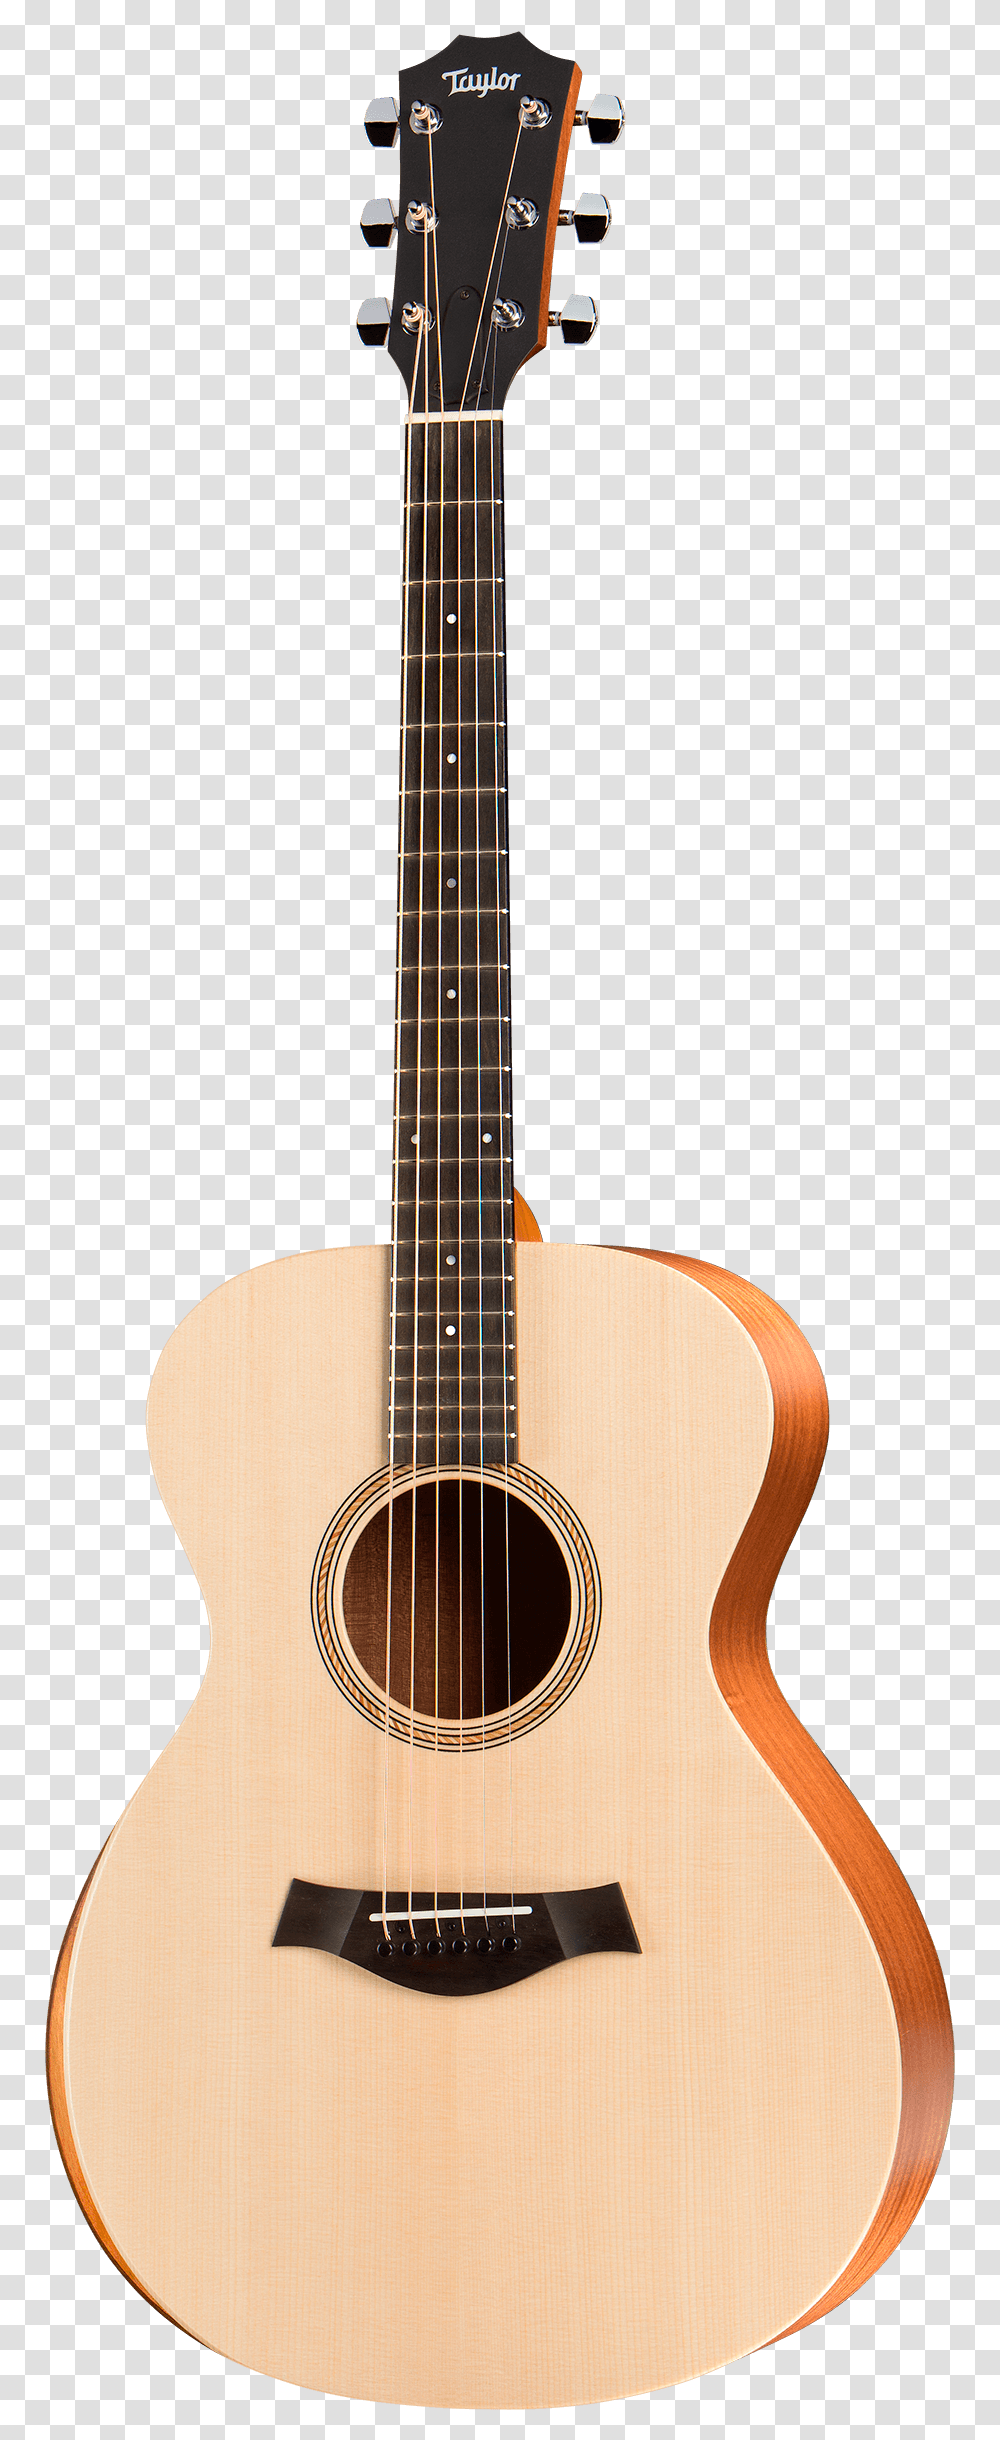 Graphic Free Download Drawing Guitars Pen Taylor, Leisure Activities, Musical Instrument, Bass Guitar, Lute Transparent Png